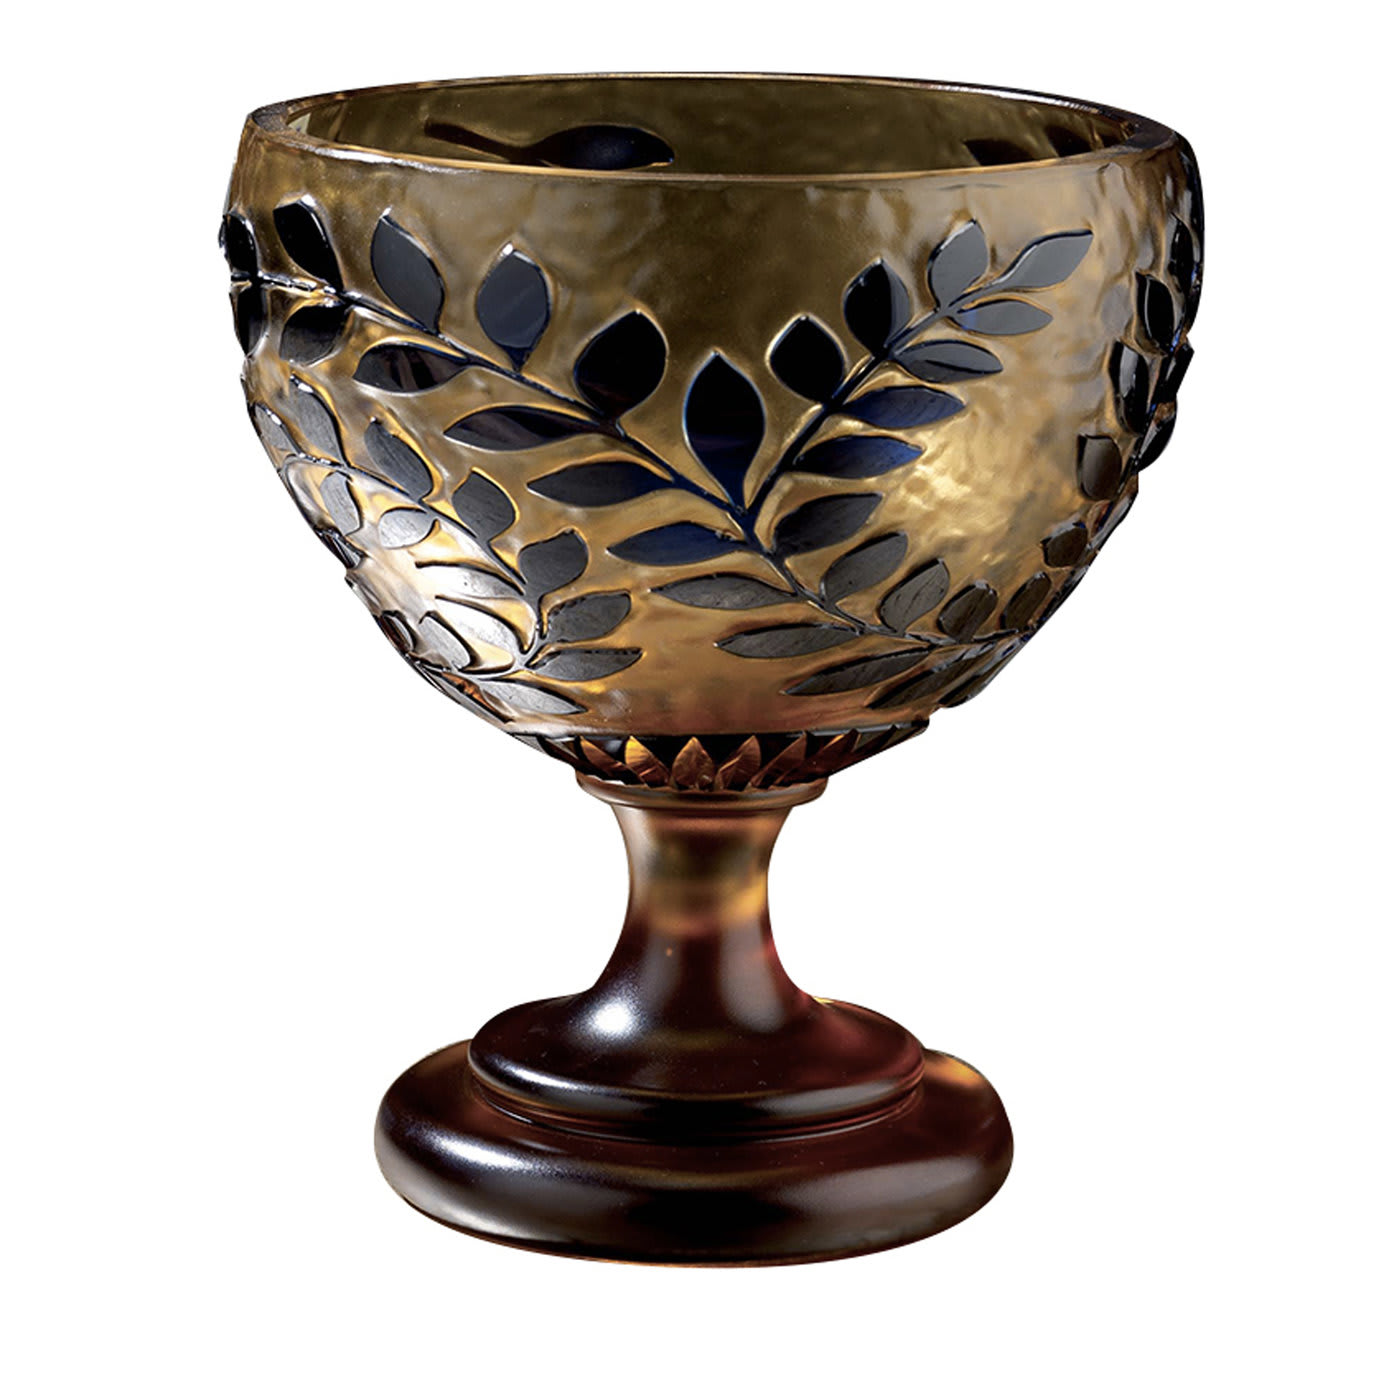 Crystal Cup I in Amber and Blue - Nuova Cev